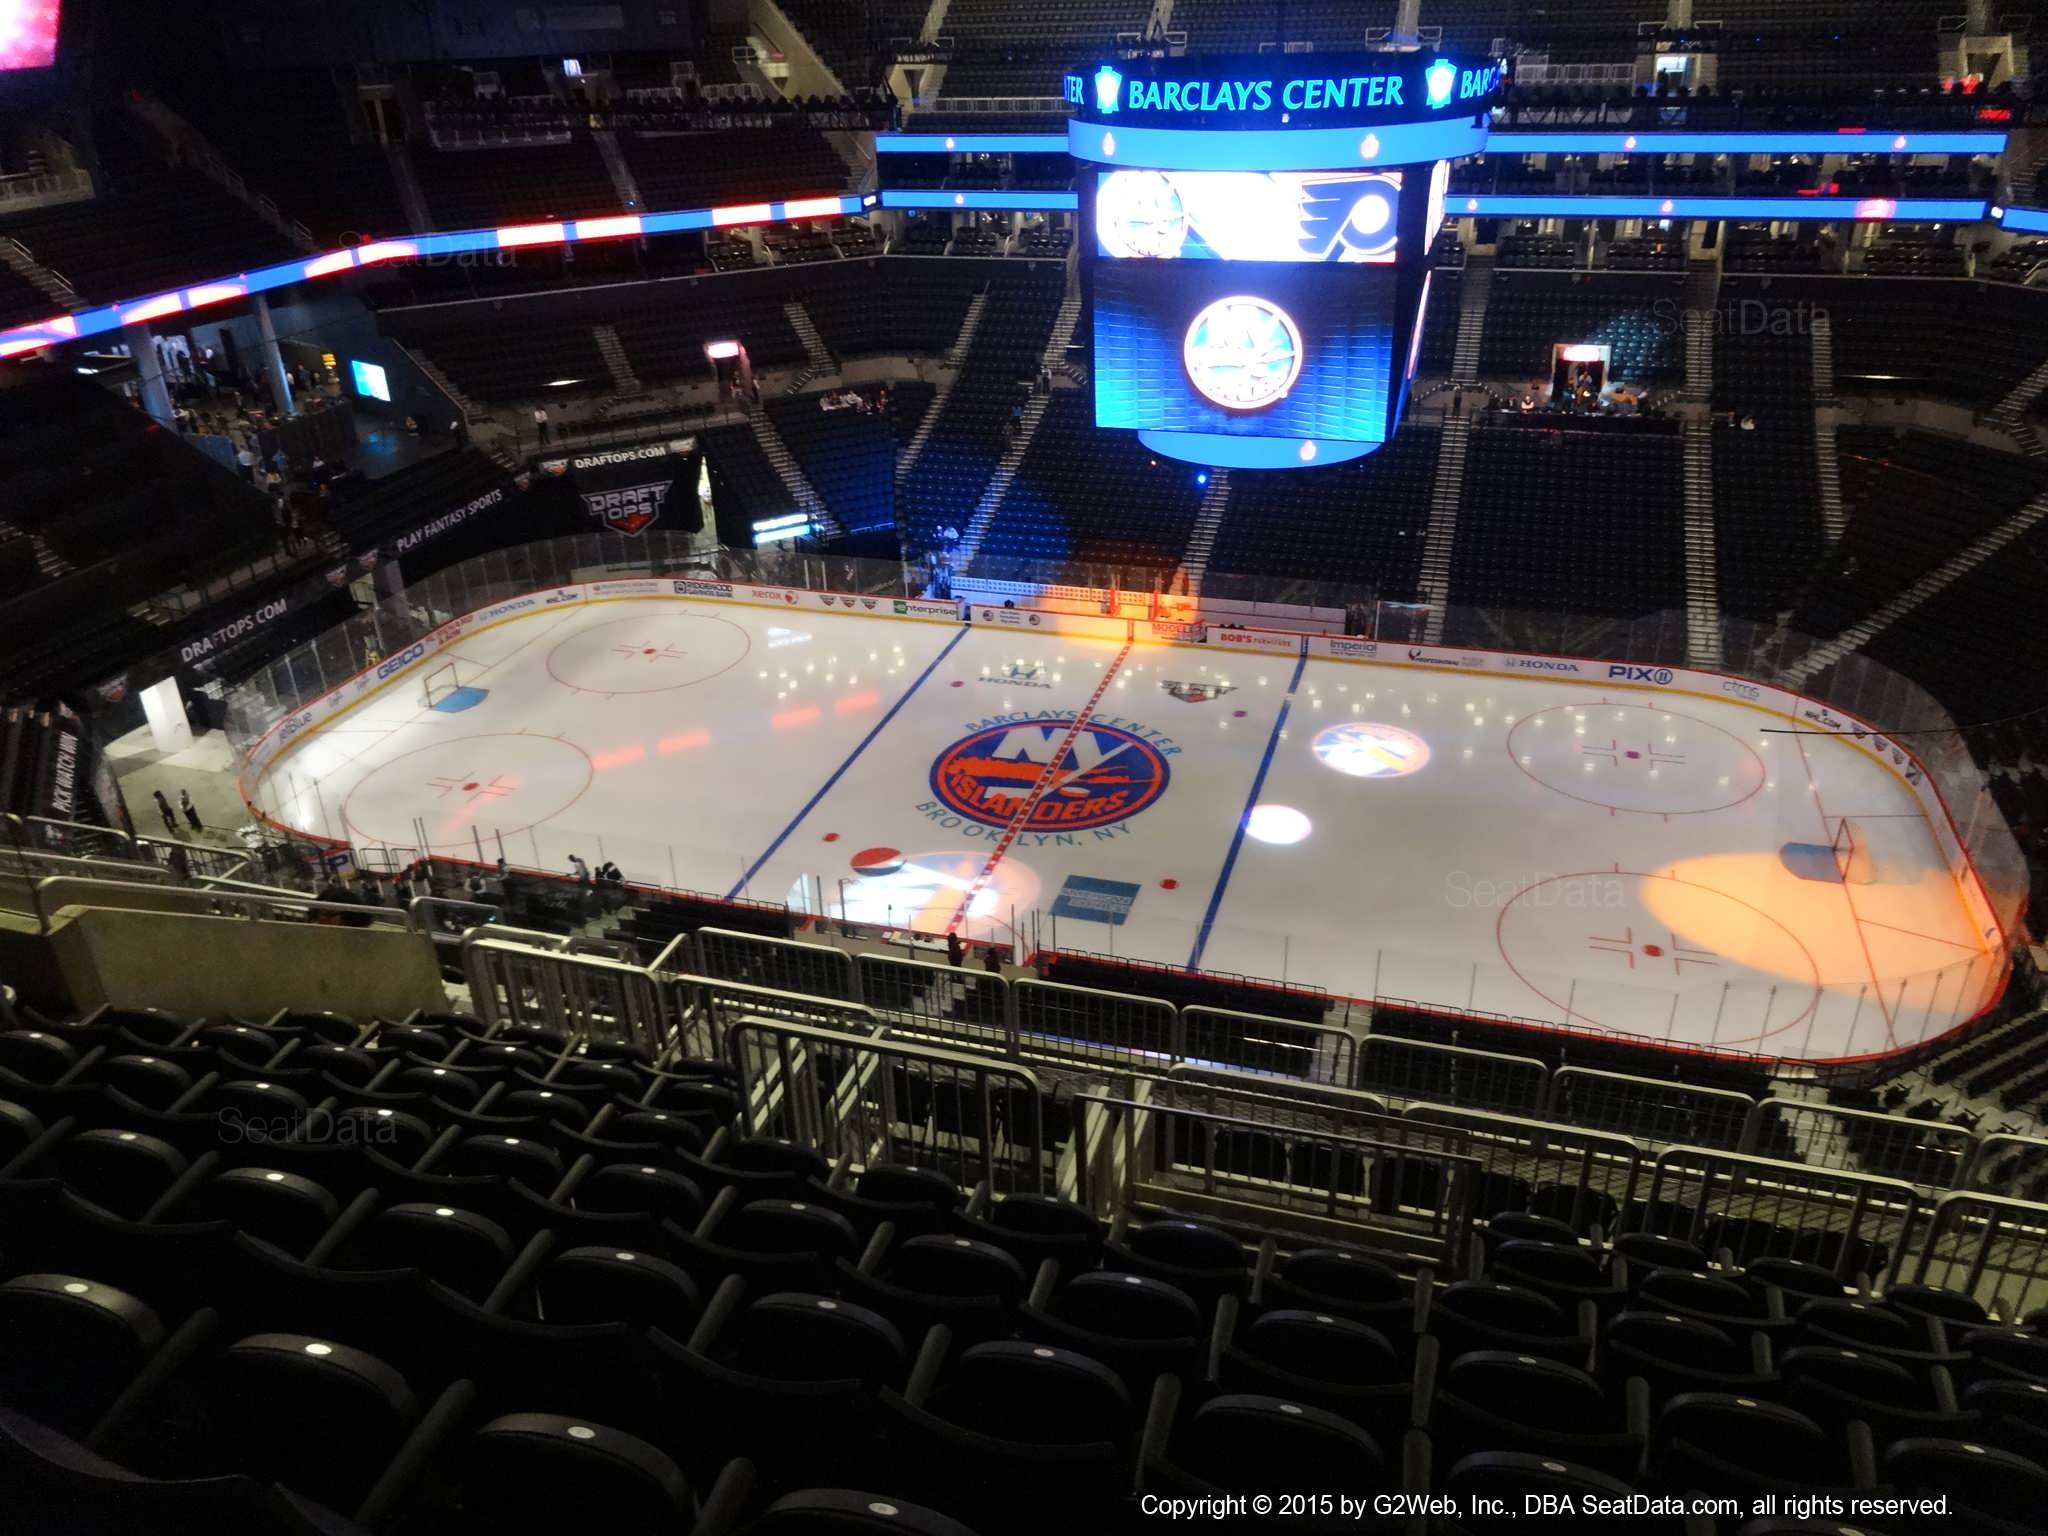 Seat View from Section 223 at the Barclays Center, home of the New York Islanders